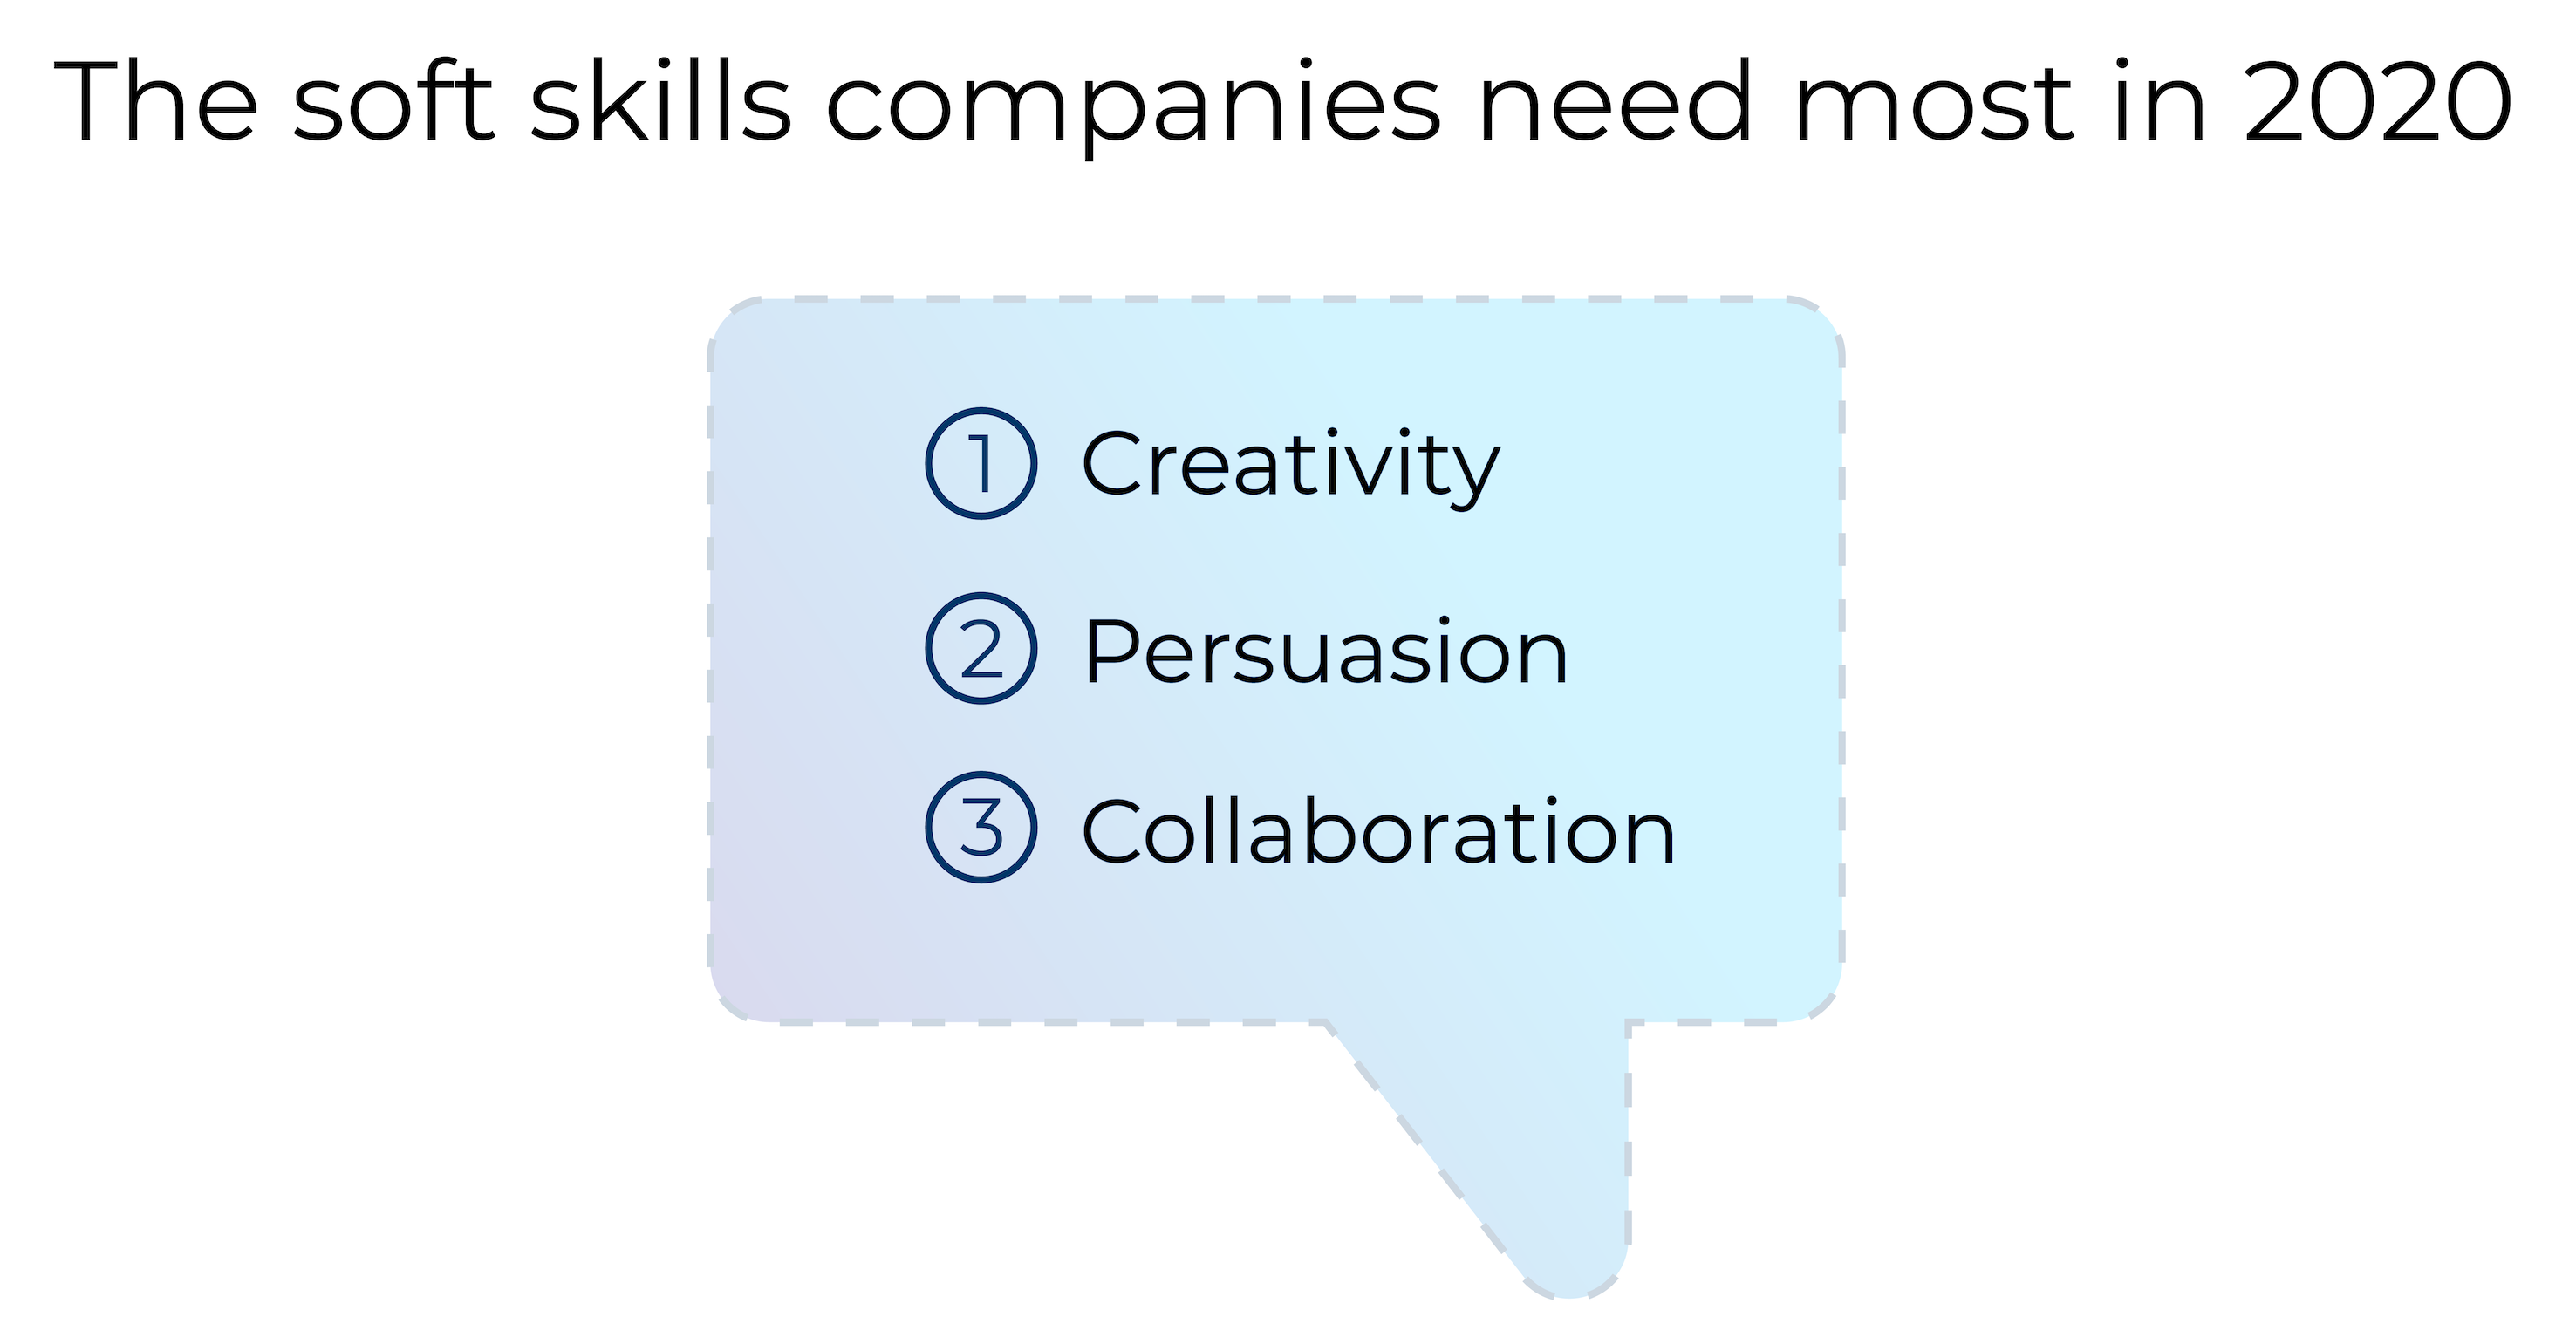 The soft skills companies need most in 2020: 1. Creativity, 2. Persuasion, 3. Collaboration.